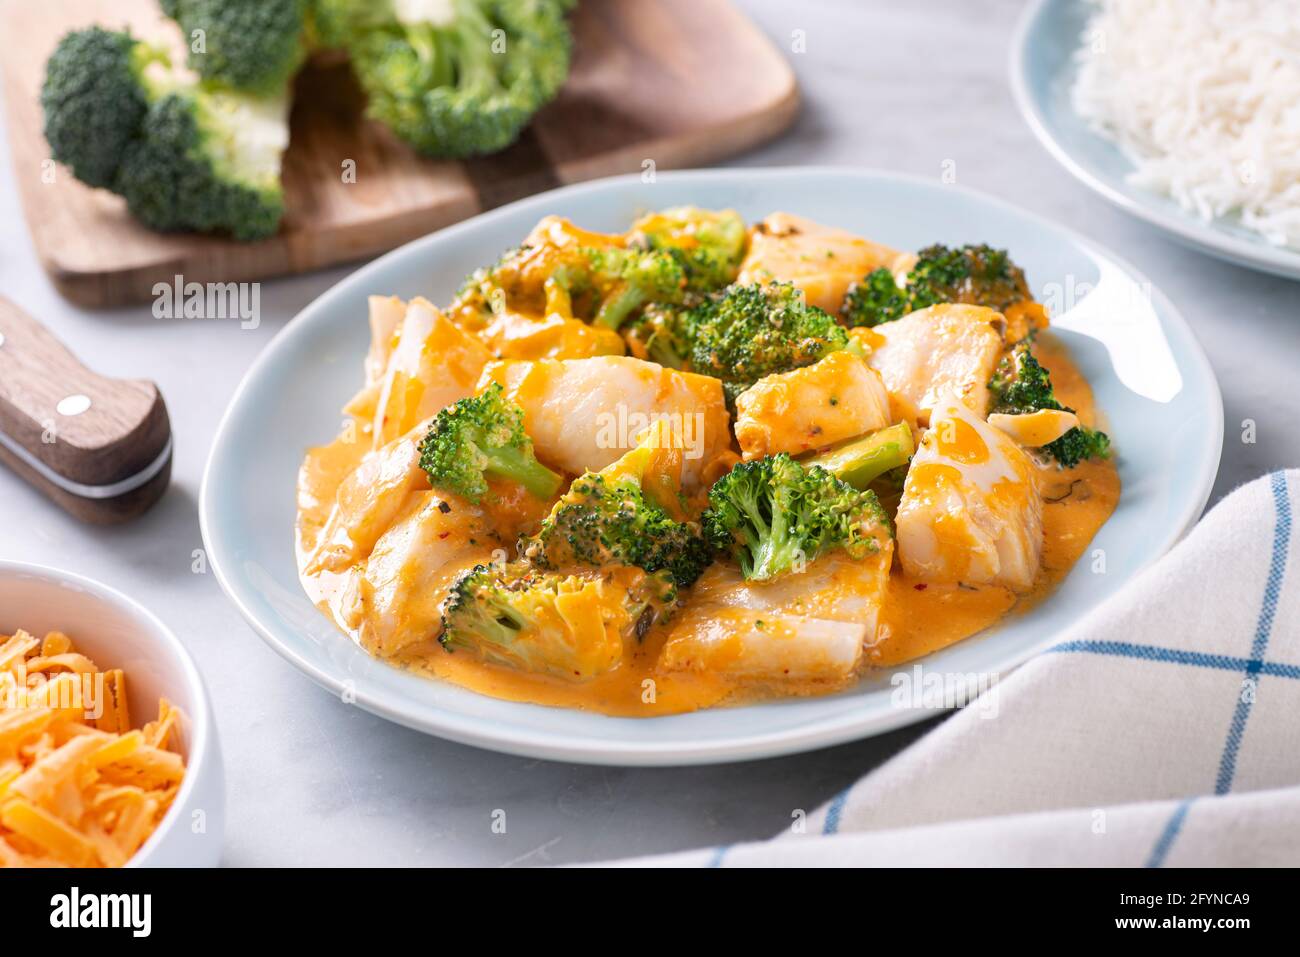 Delicious oven baked fish with broccoli and cheddar cheese. Stock Photo